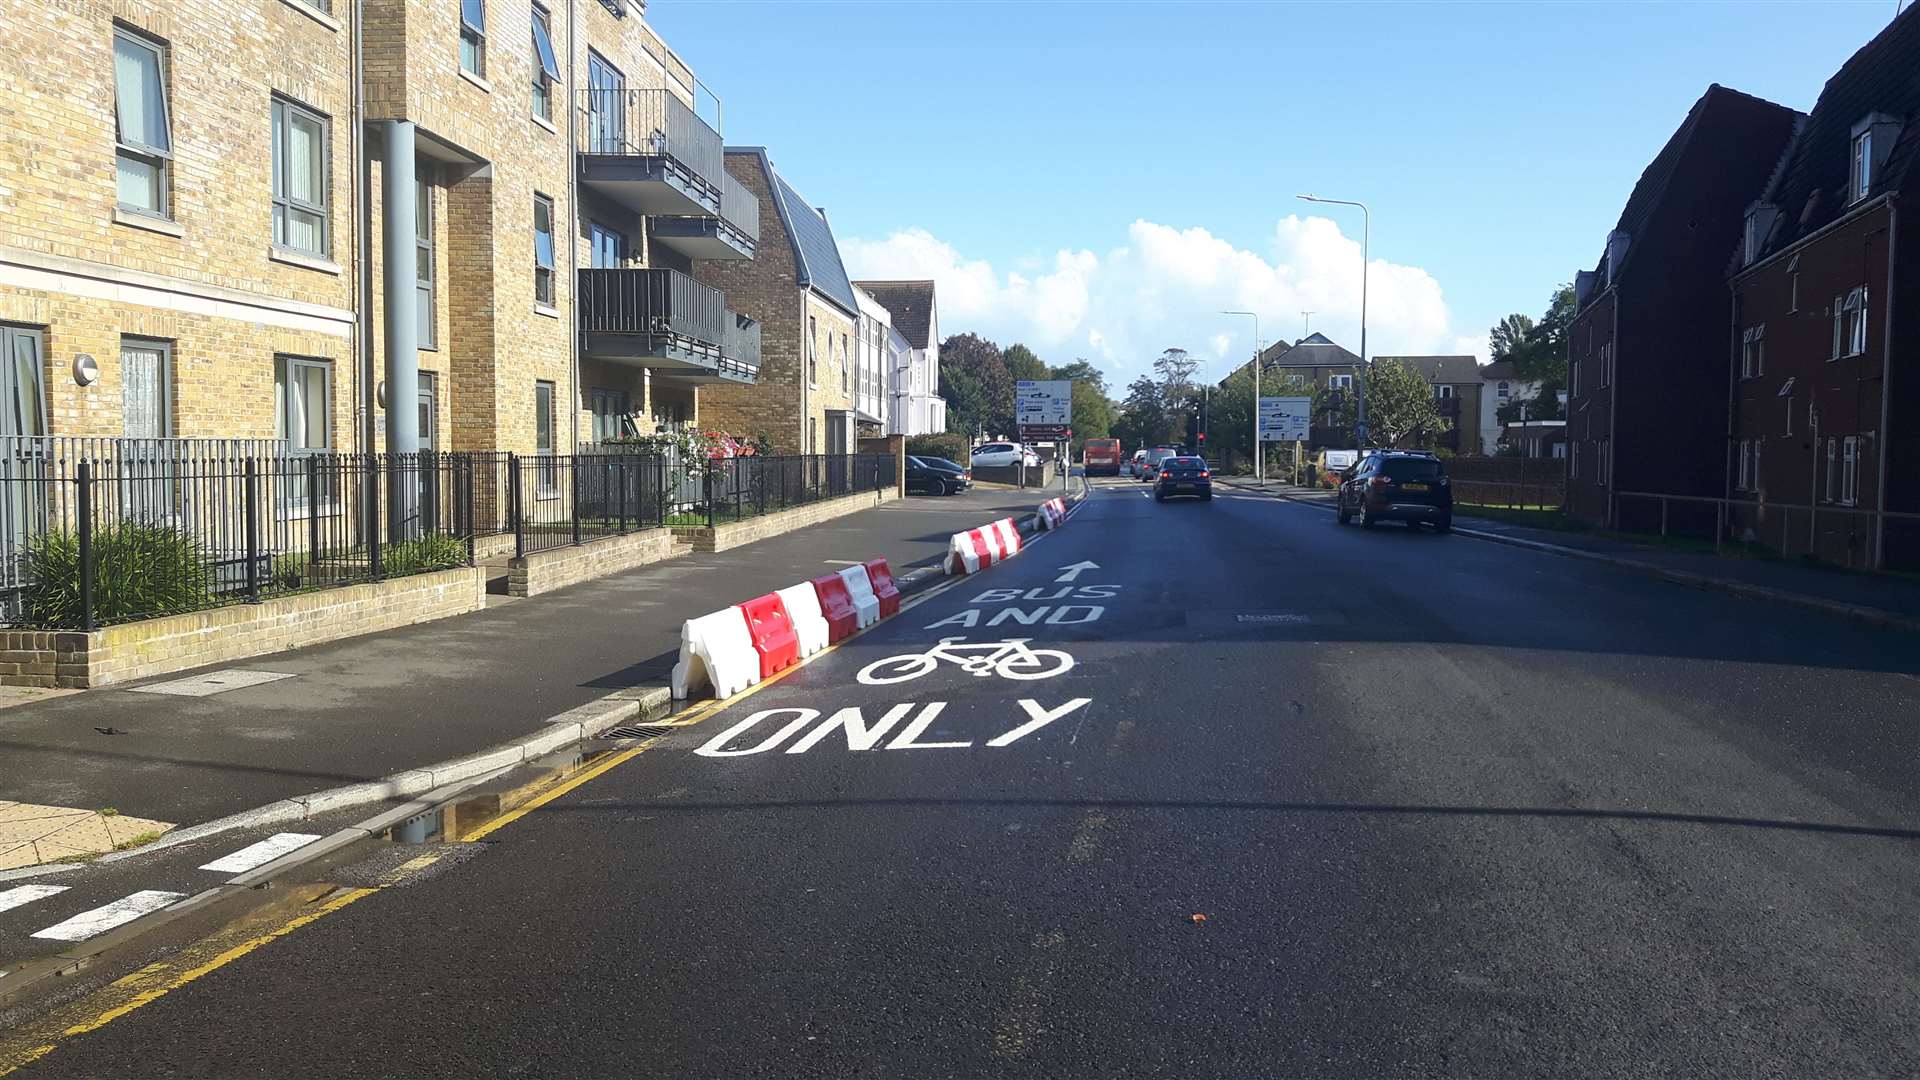 The bus and cycle lane along Maison Dieu Road was dubbed a 'fiasco' and has been scrapped